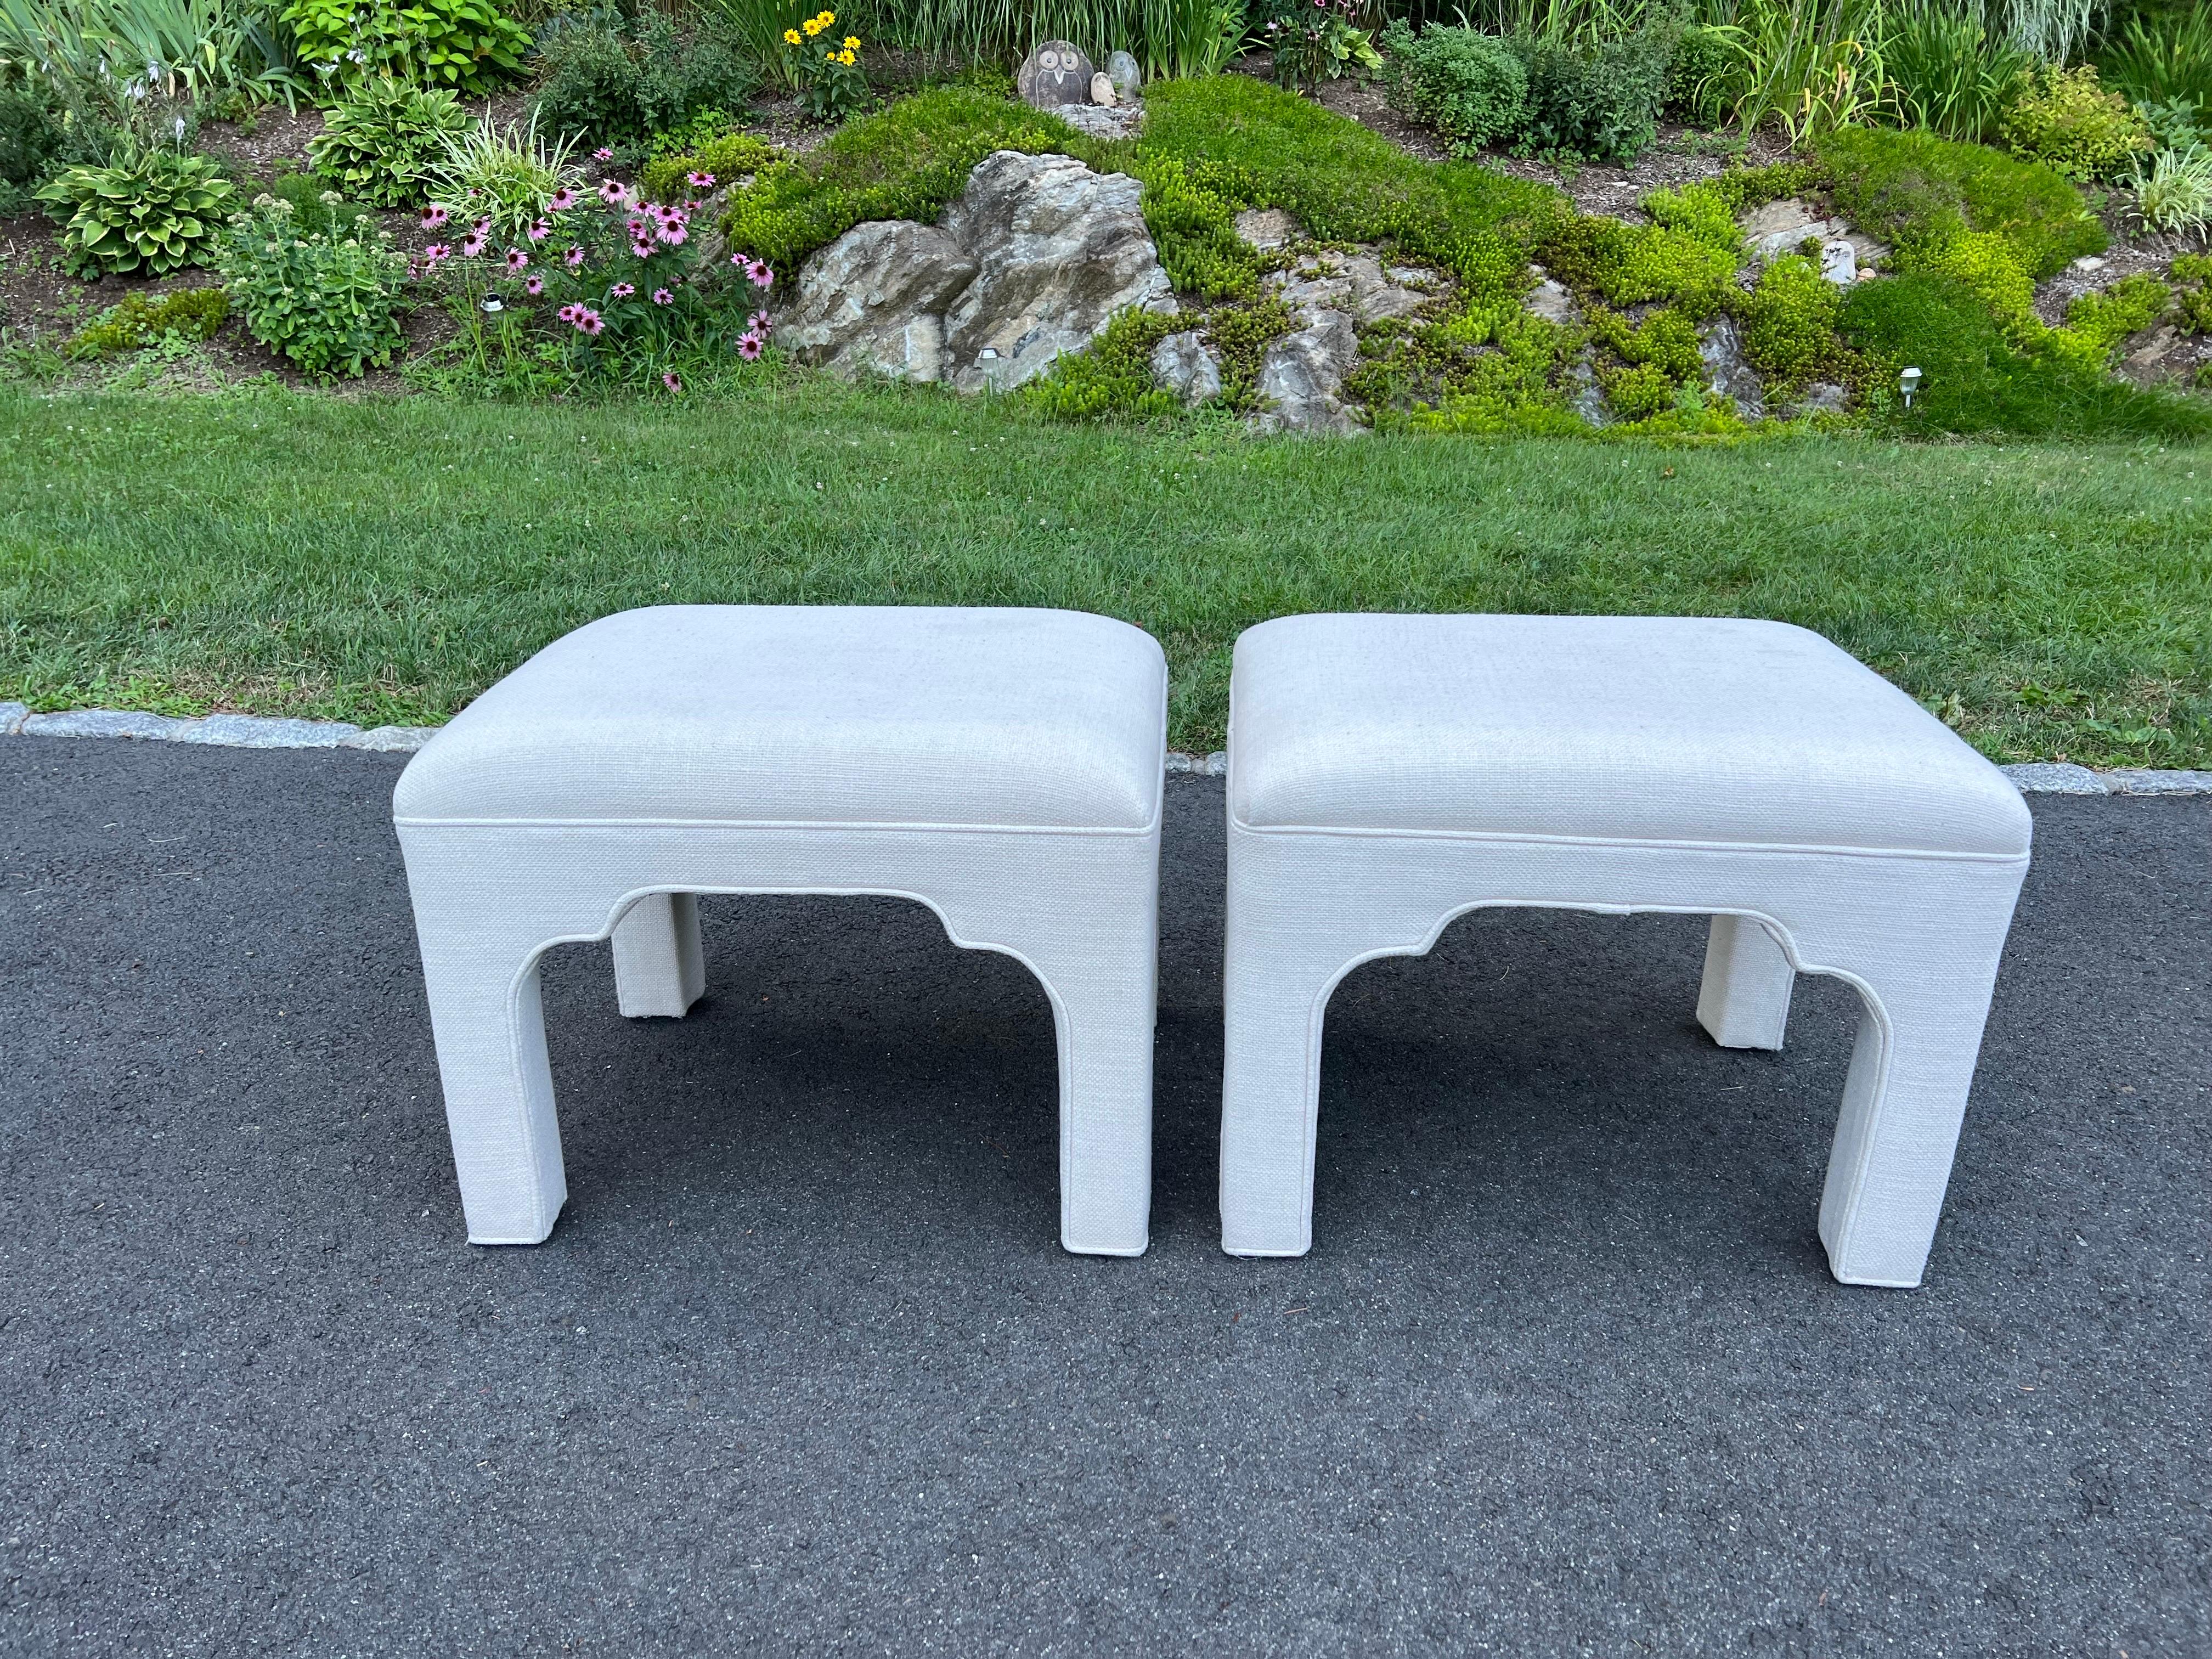 Pair of Lillian August Linen Ottomans. Classic tailored pair with a Moroccan vibe. Oversized and very sturdy. Some small superficial spots but otherwise in excellent shape. Use as is or recover if you want.